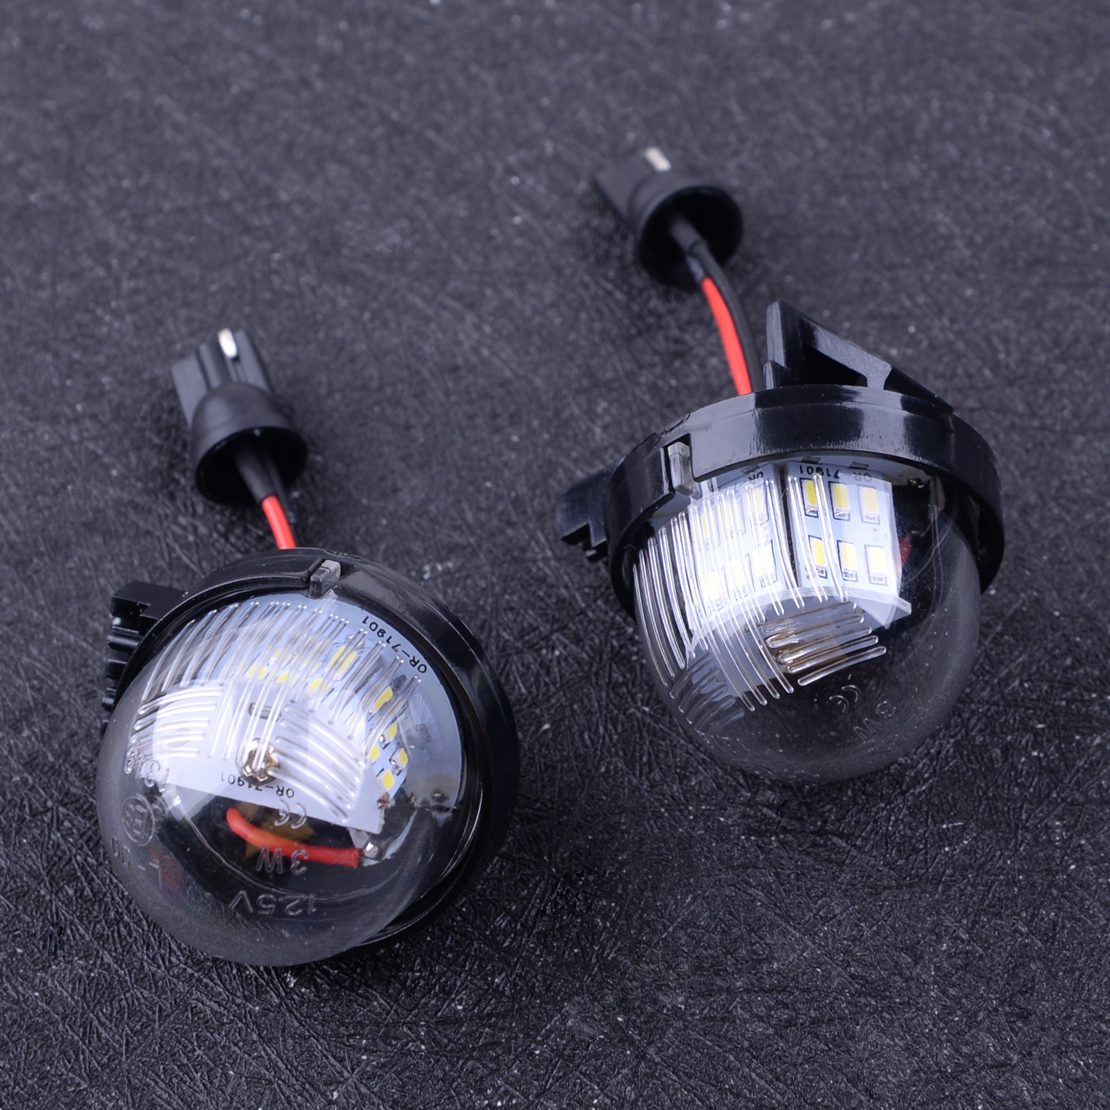 2x LED License Plate Number Light Lamp Fit for Suzuki